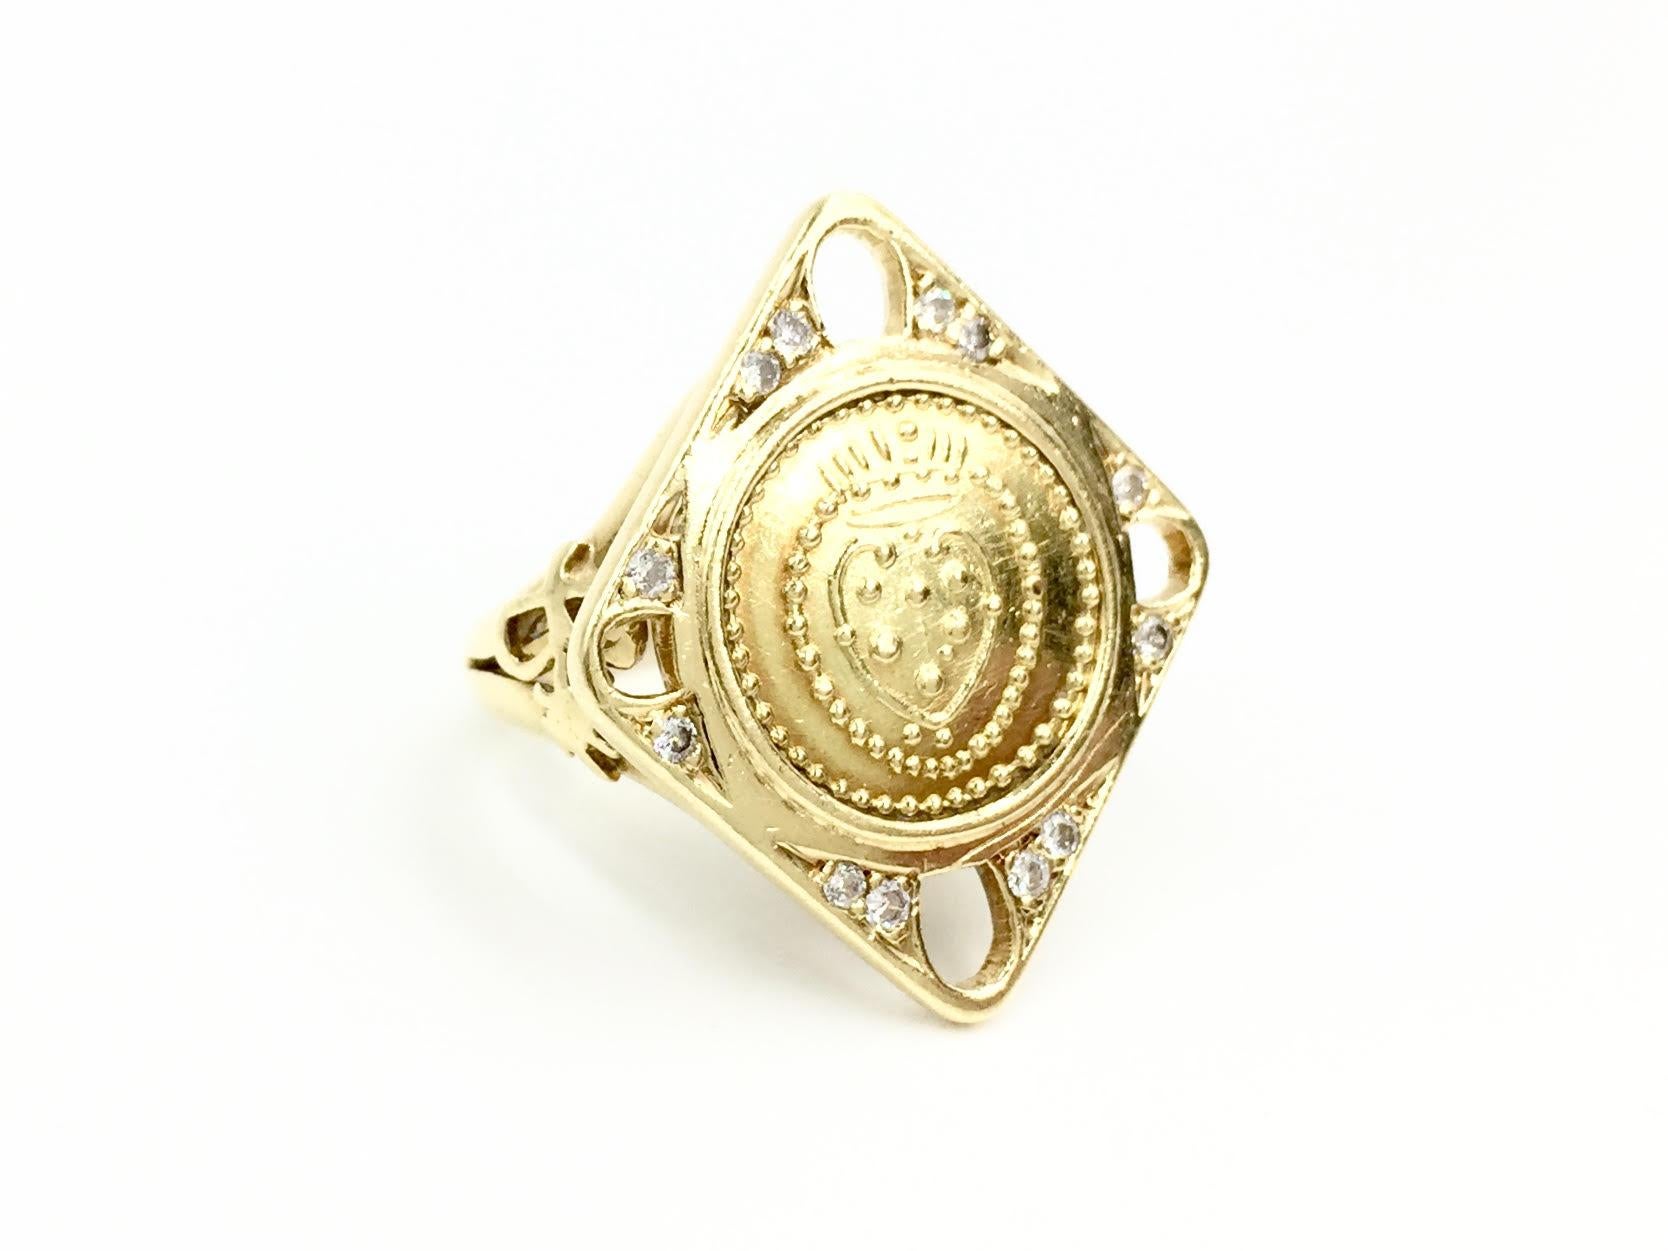 Crafted by expert goldsmith Italian jewelry company, Torrini. This hand made 18 karat yellow gold ring features a beautifully unique square shield design with an engraved round coin in the center. Twelve round diamonds add sparkle to each corner.